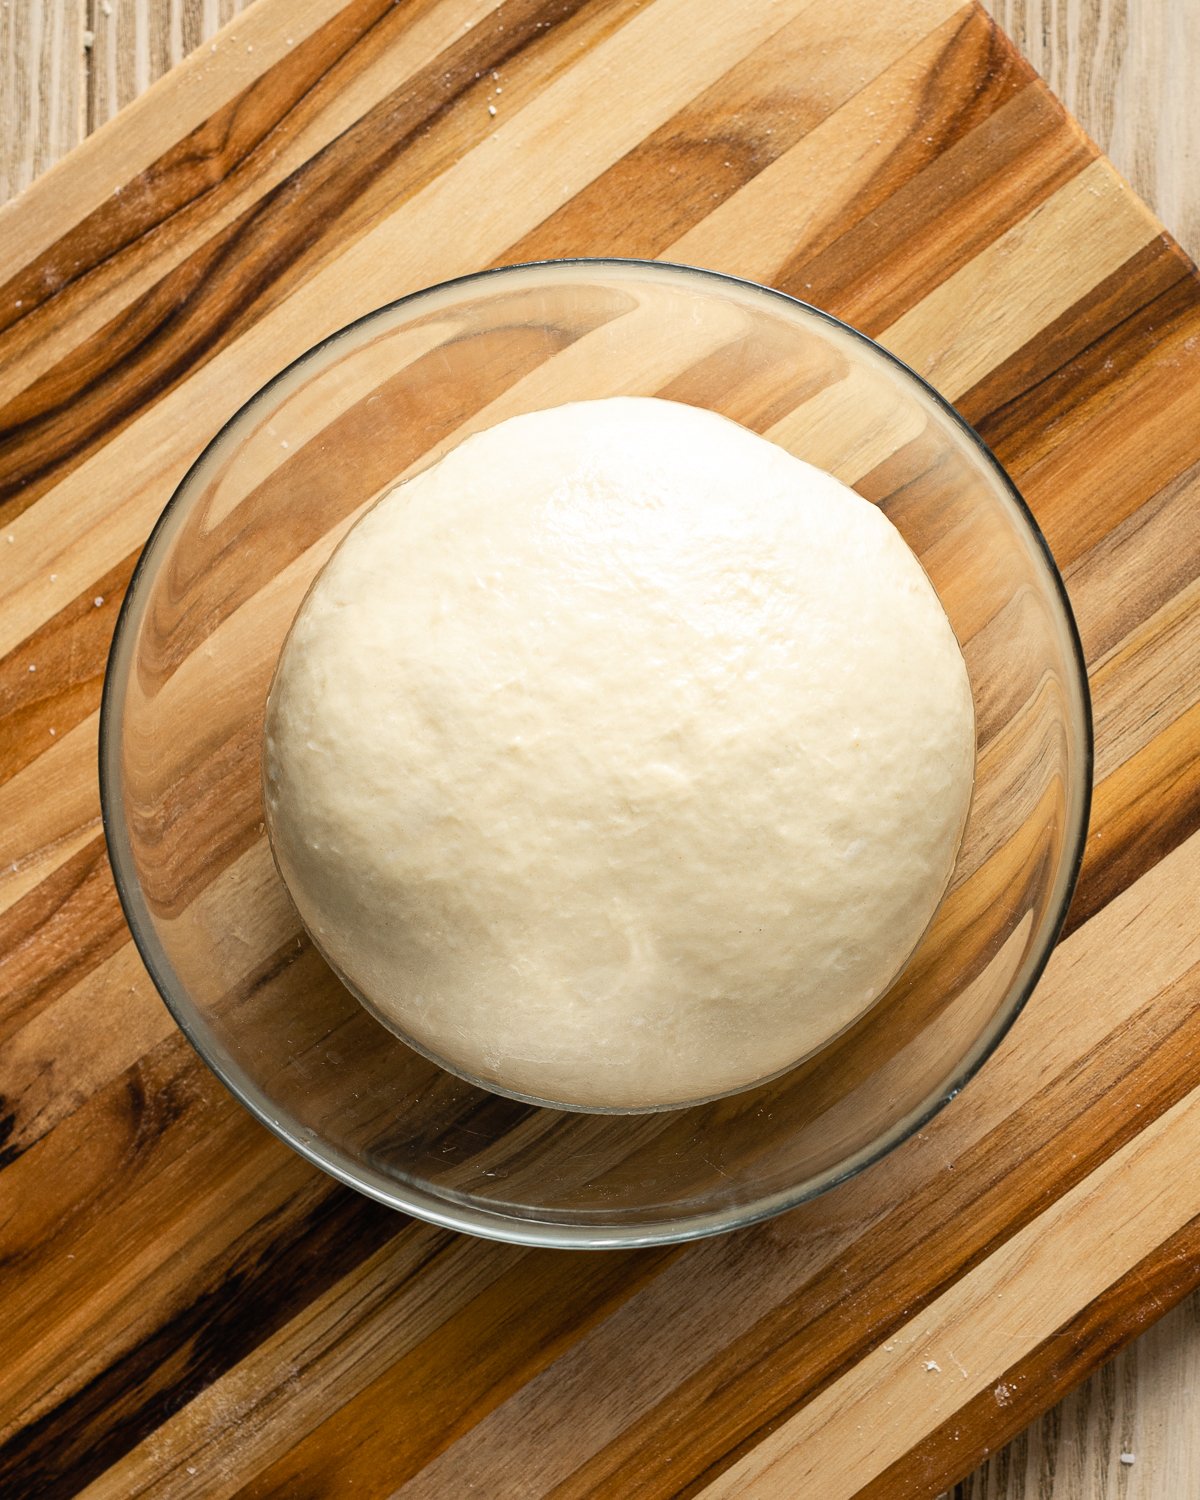 dough in a bowl on a wooden cutting board